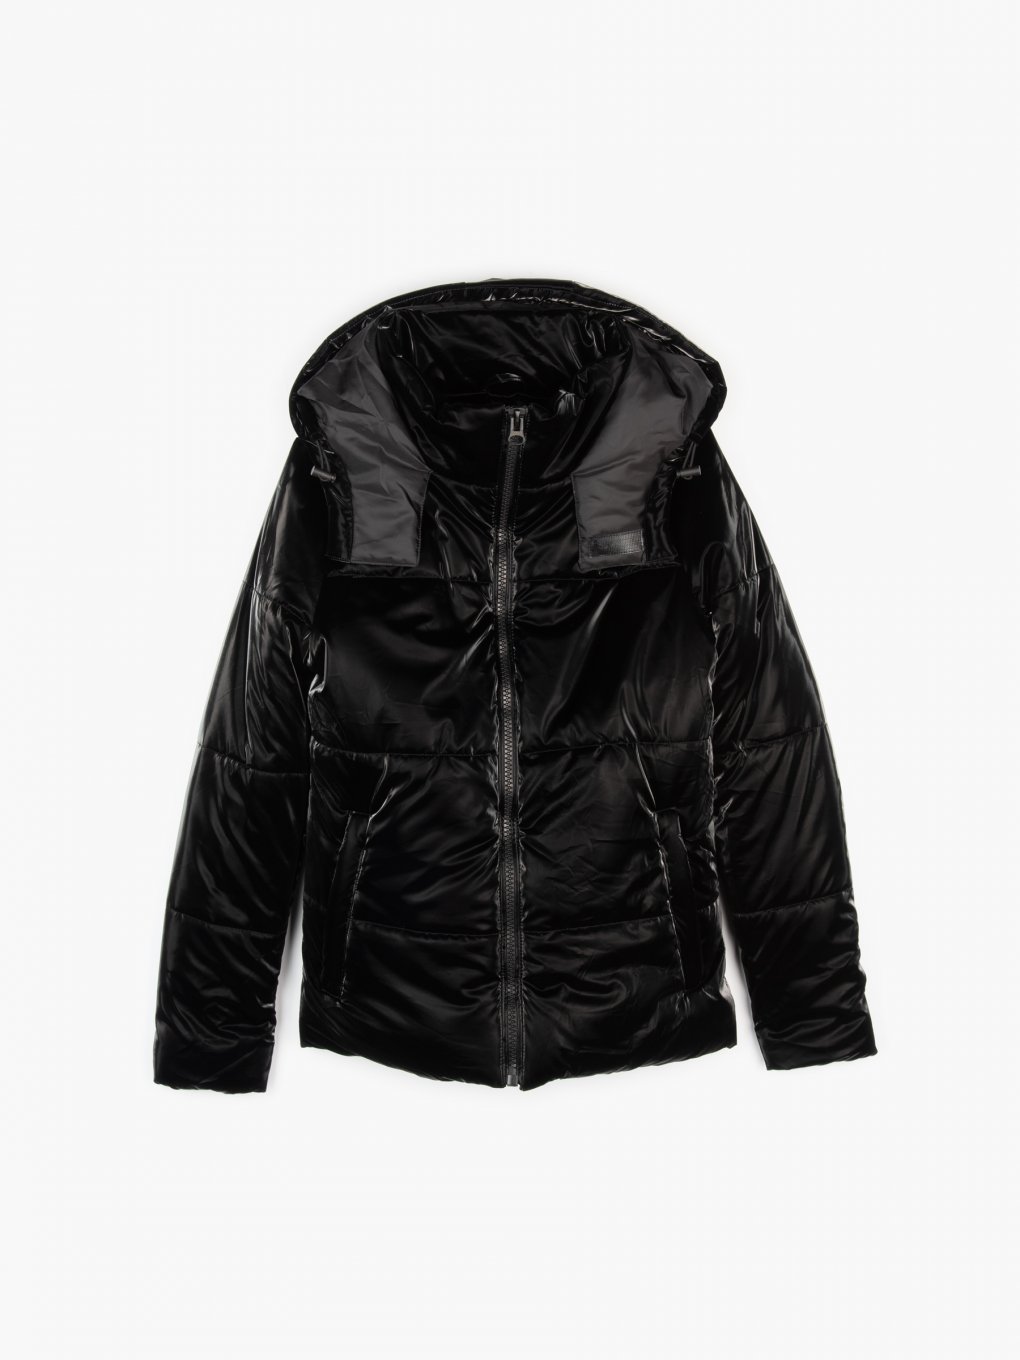 Quilted padded metallic jacket